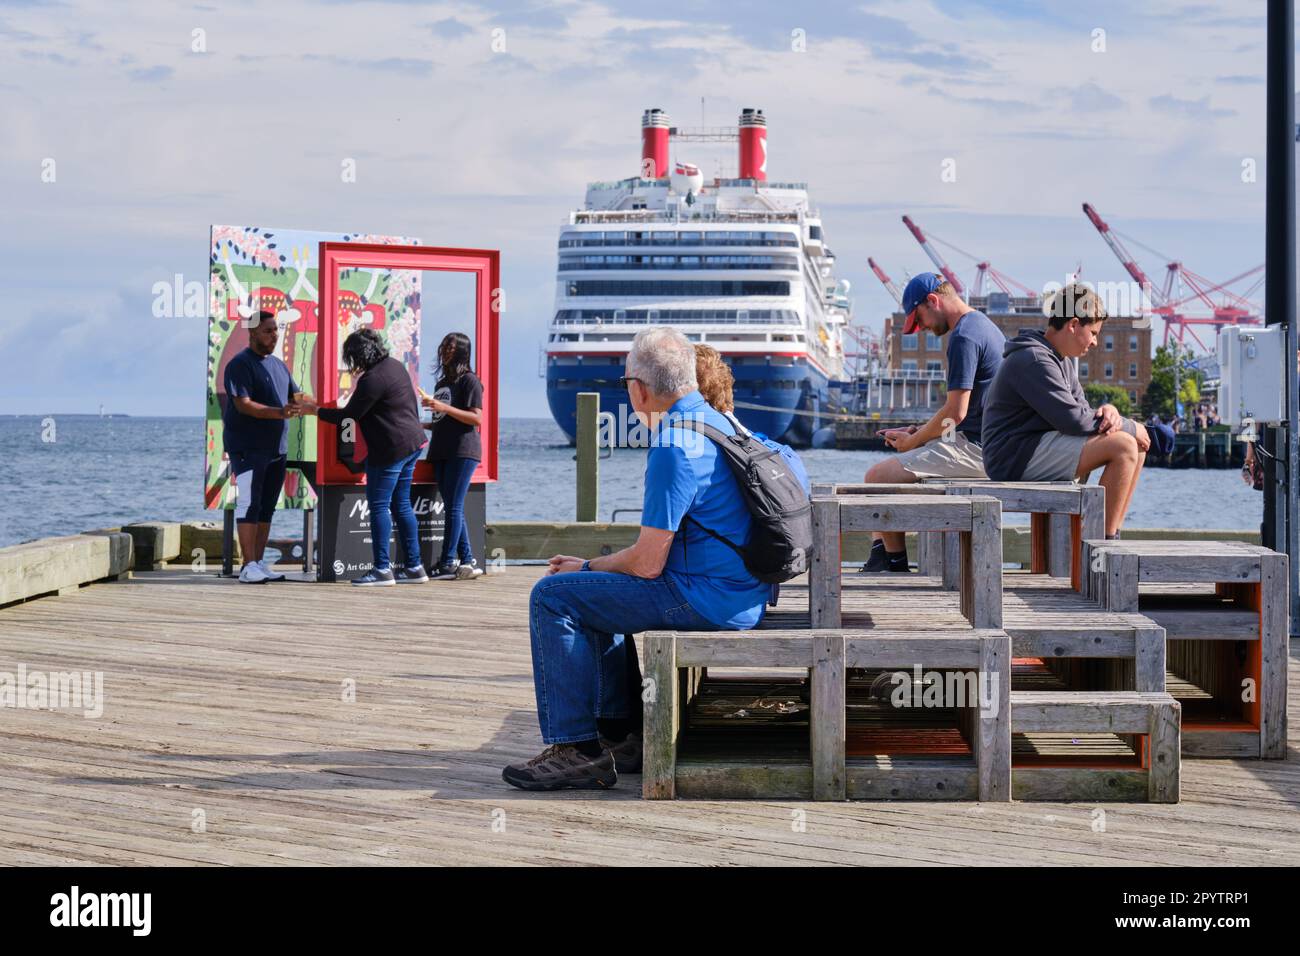 visitors sitting on bench on Halifax boardwalk with cruise ship in background Stock Photo